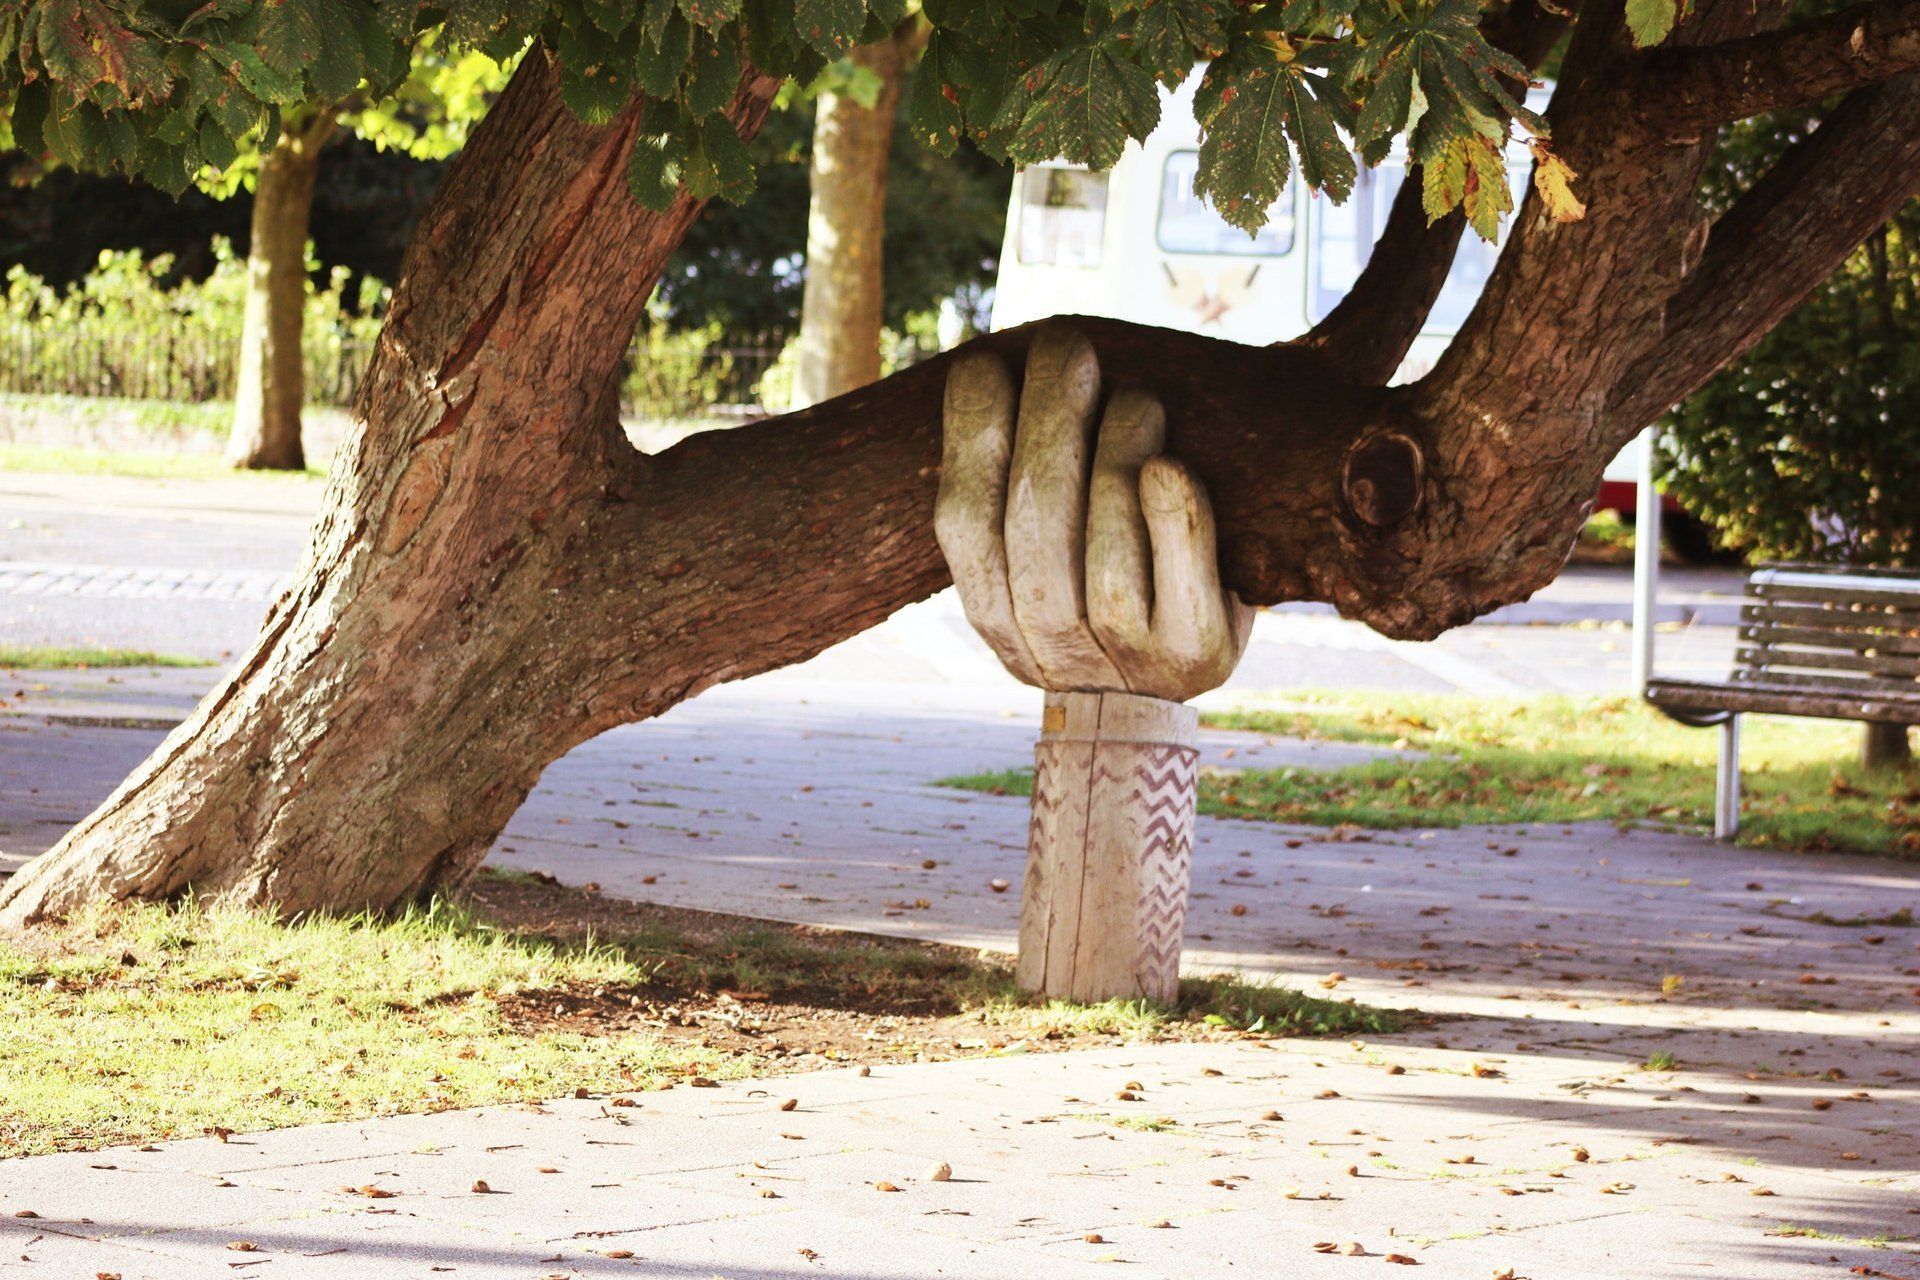 a statue of a hand holding onto a tree branch